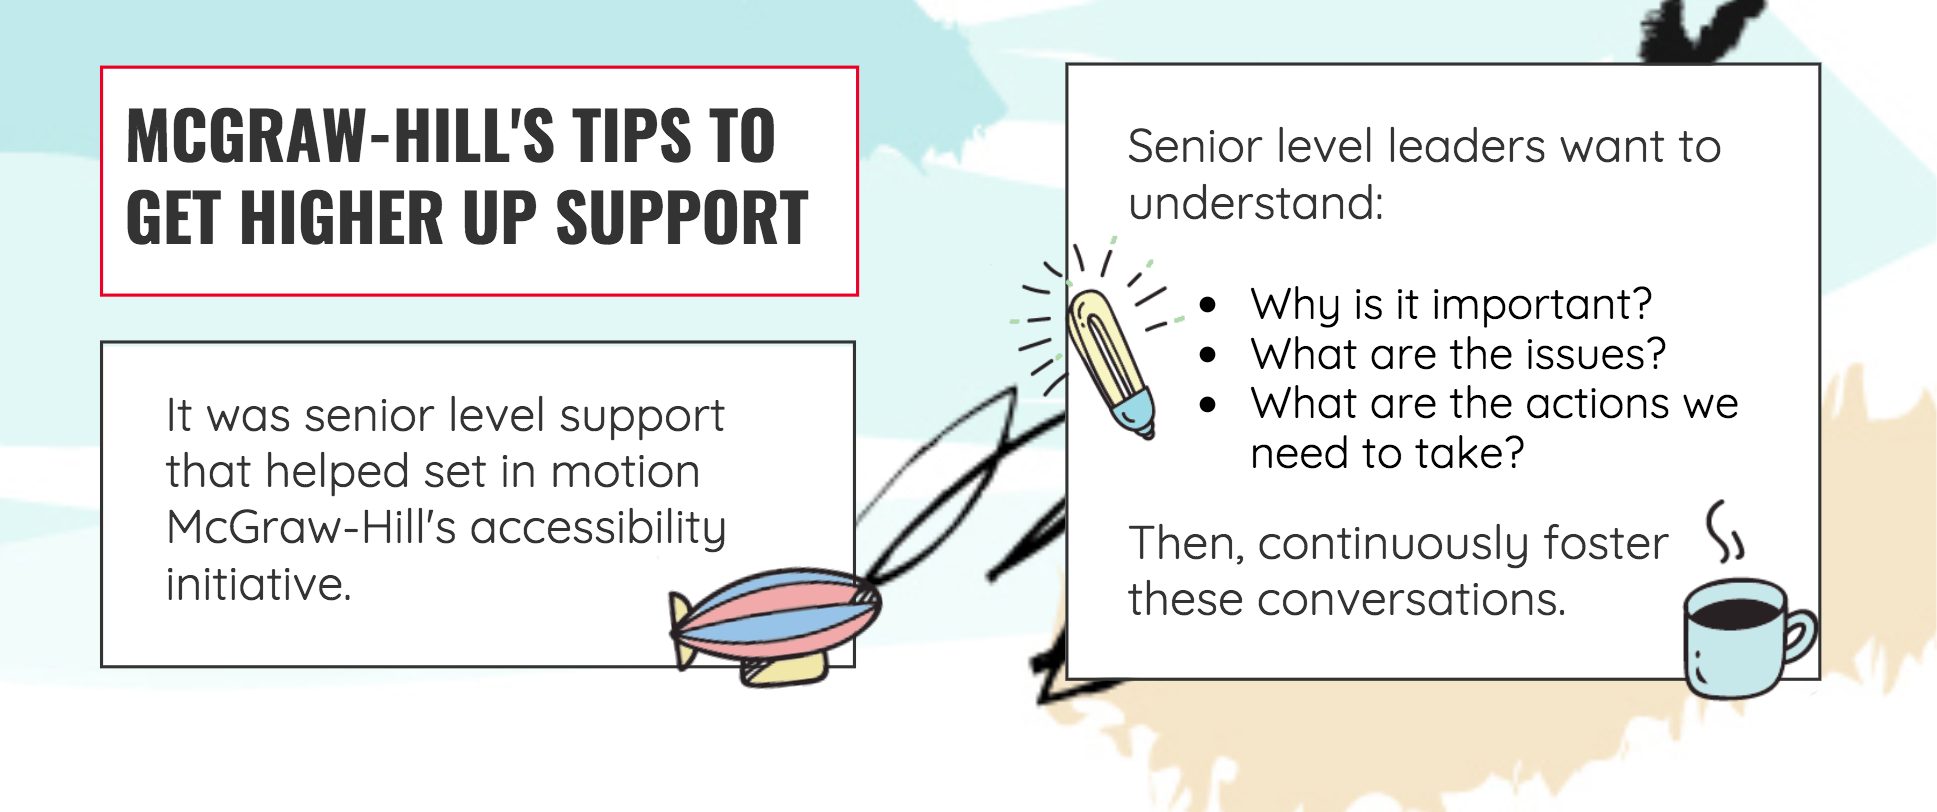 "What about higher up support? It was senior level support that helped set in motion McGraw-Hill's accessibility initiative. When trying to get senior leader back-up make sure you communicate, Why it's important, what are the issues, what are the actions we need to take